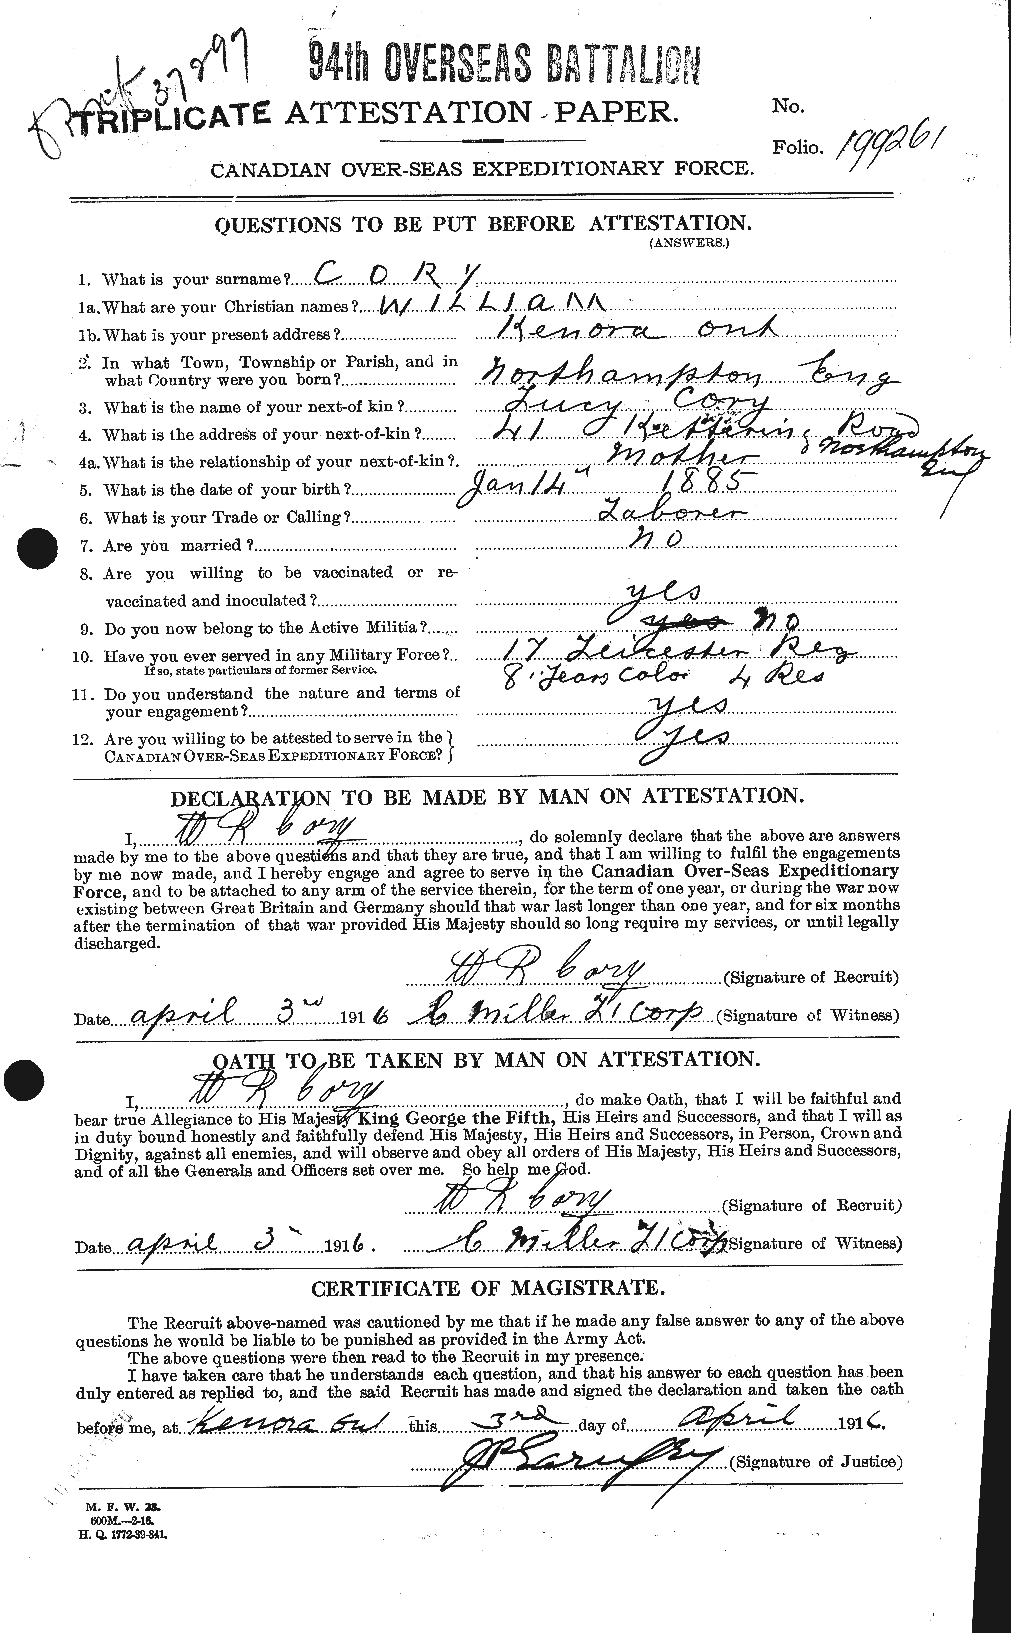 Personnel Records of the First World War - CEF 058077a